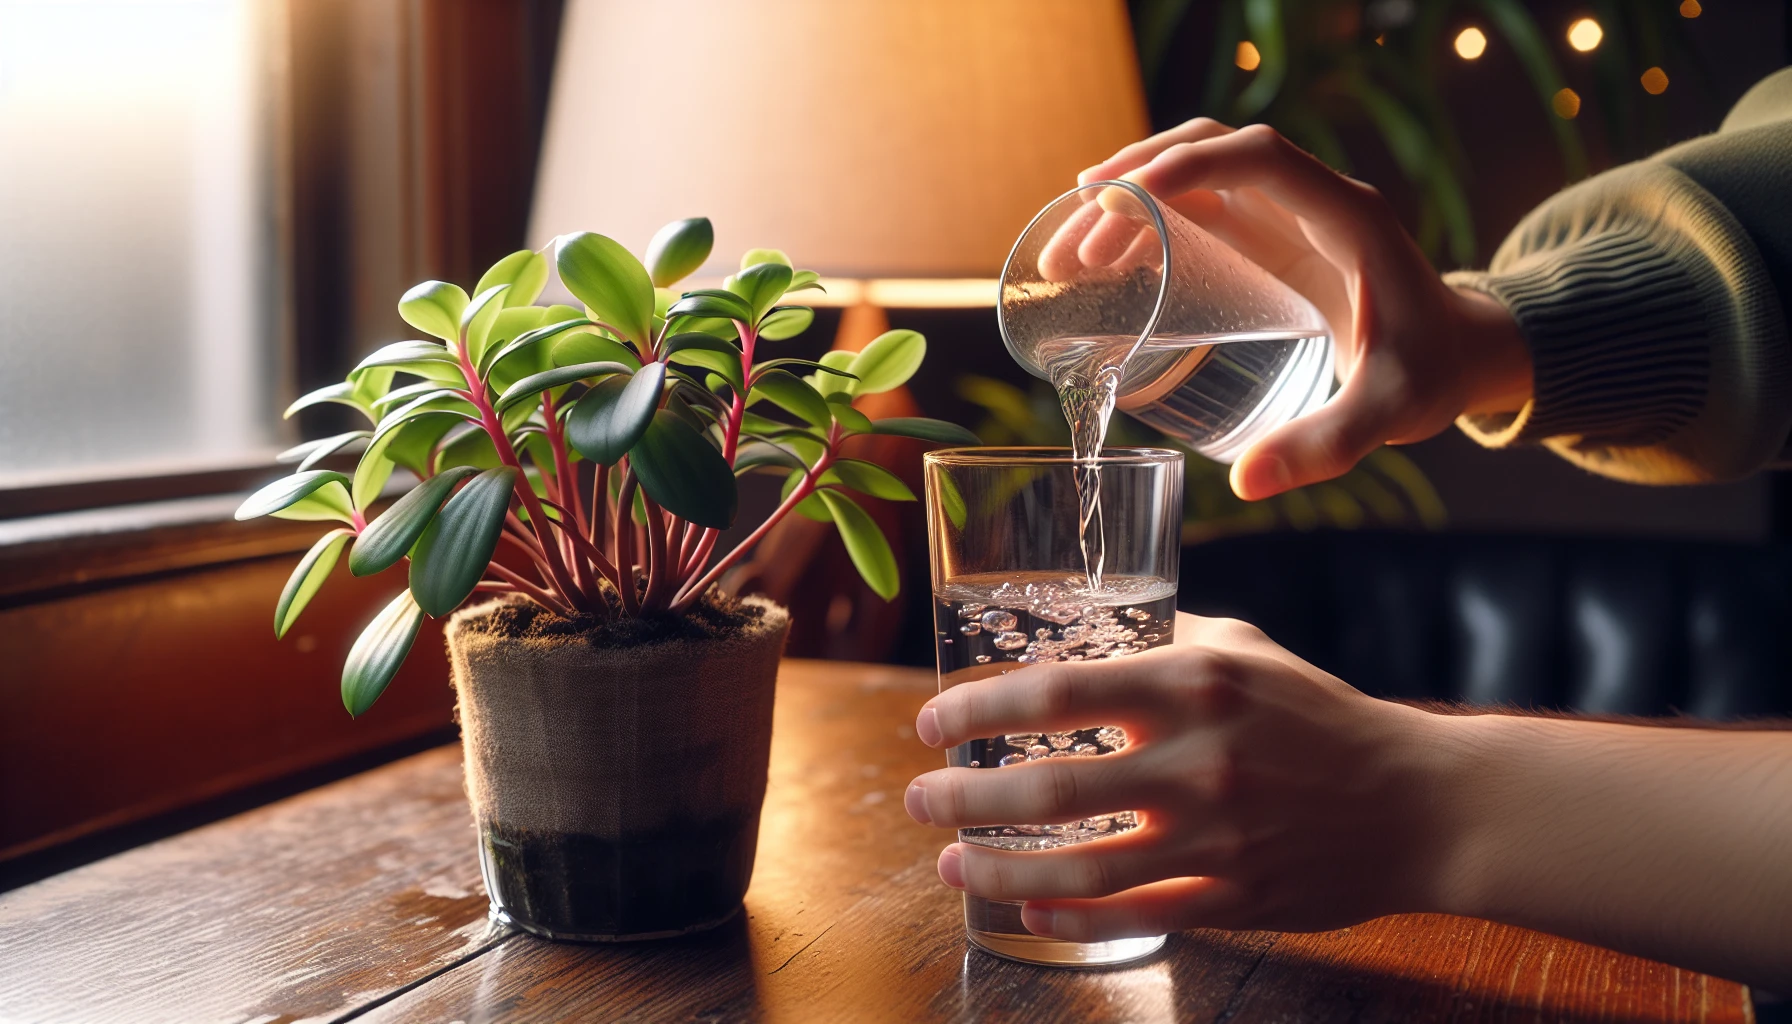 Reusing water from drinking glasses for plants